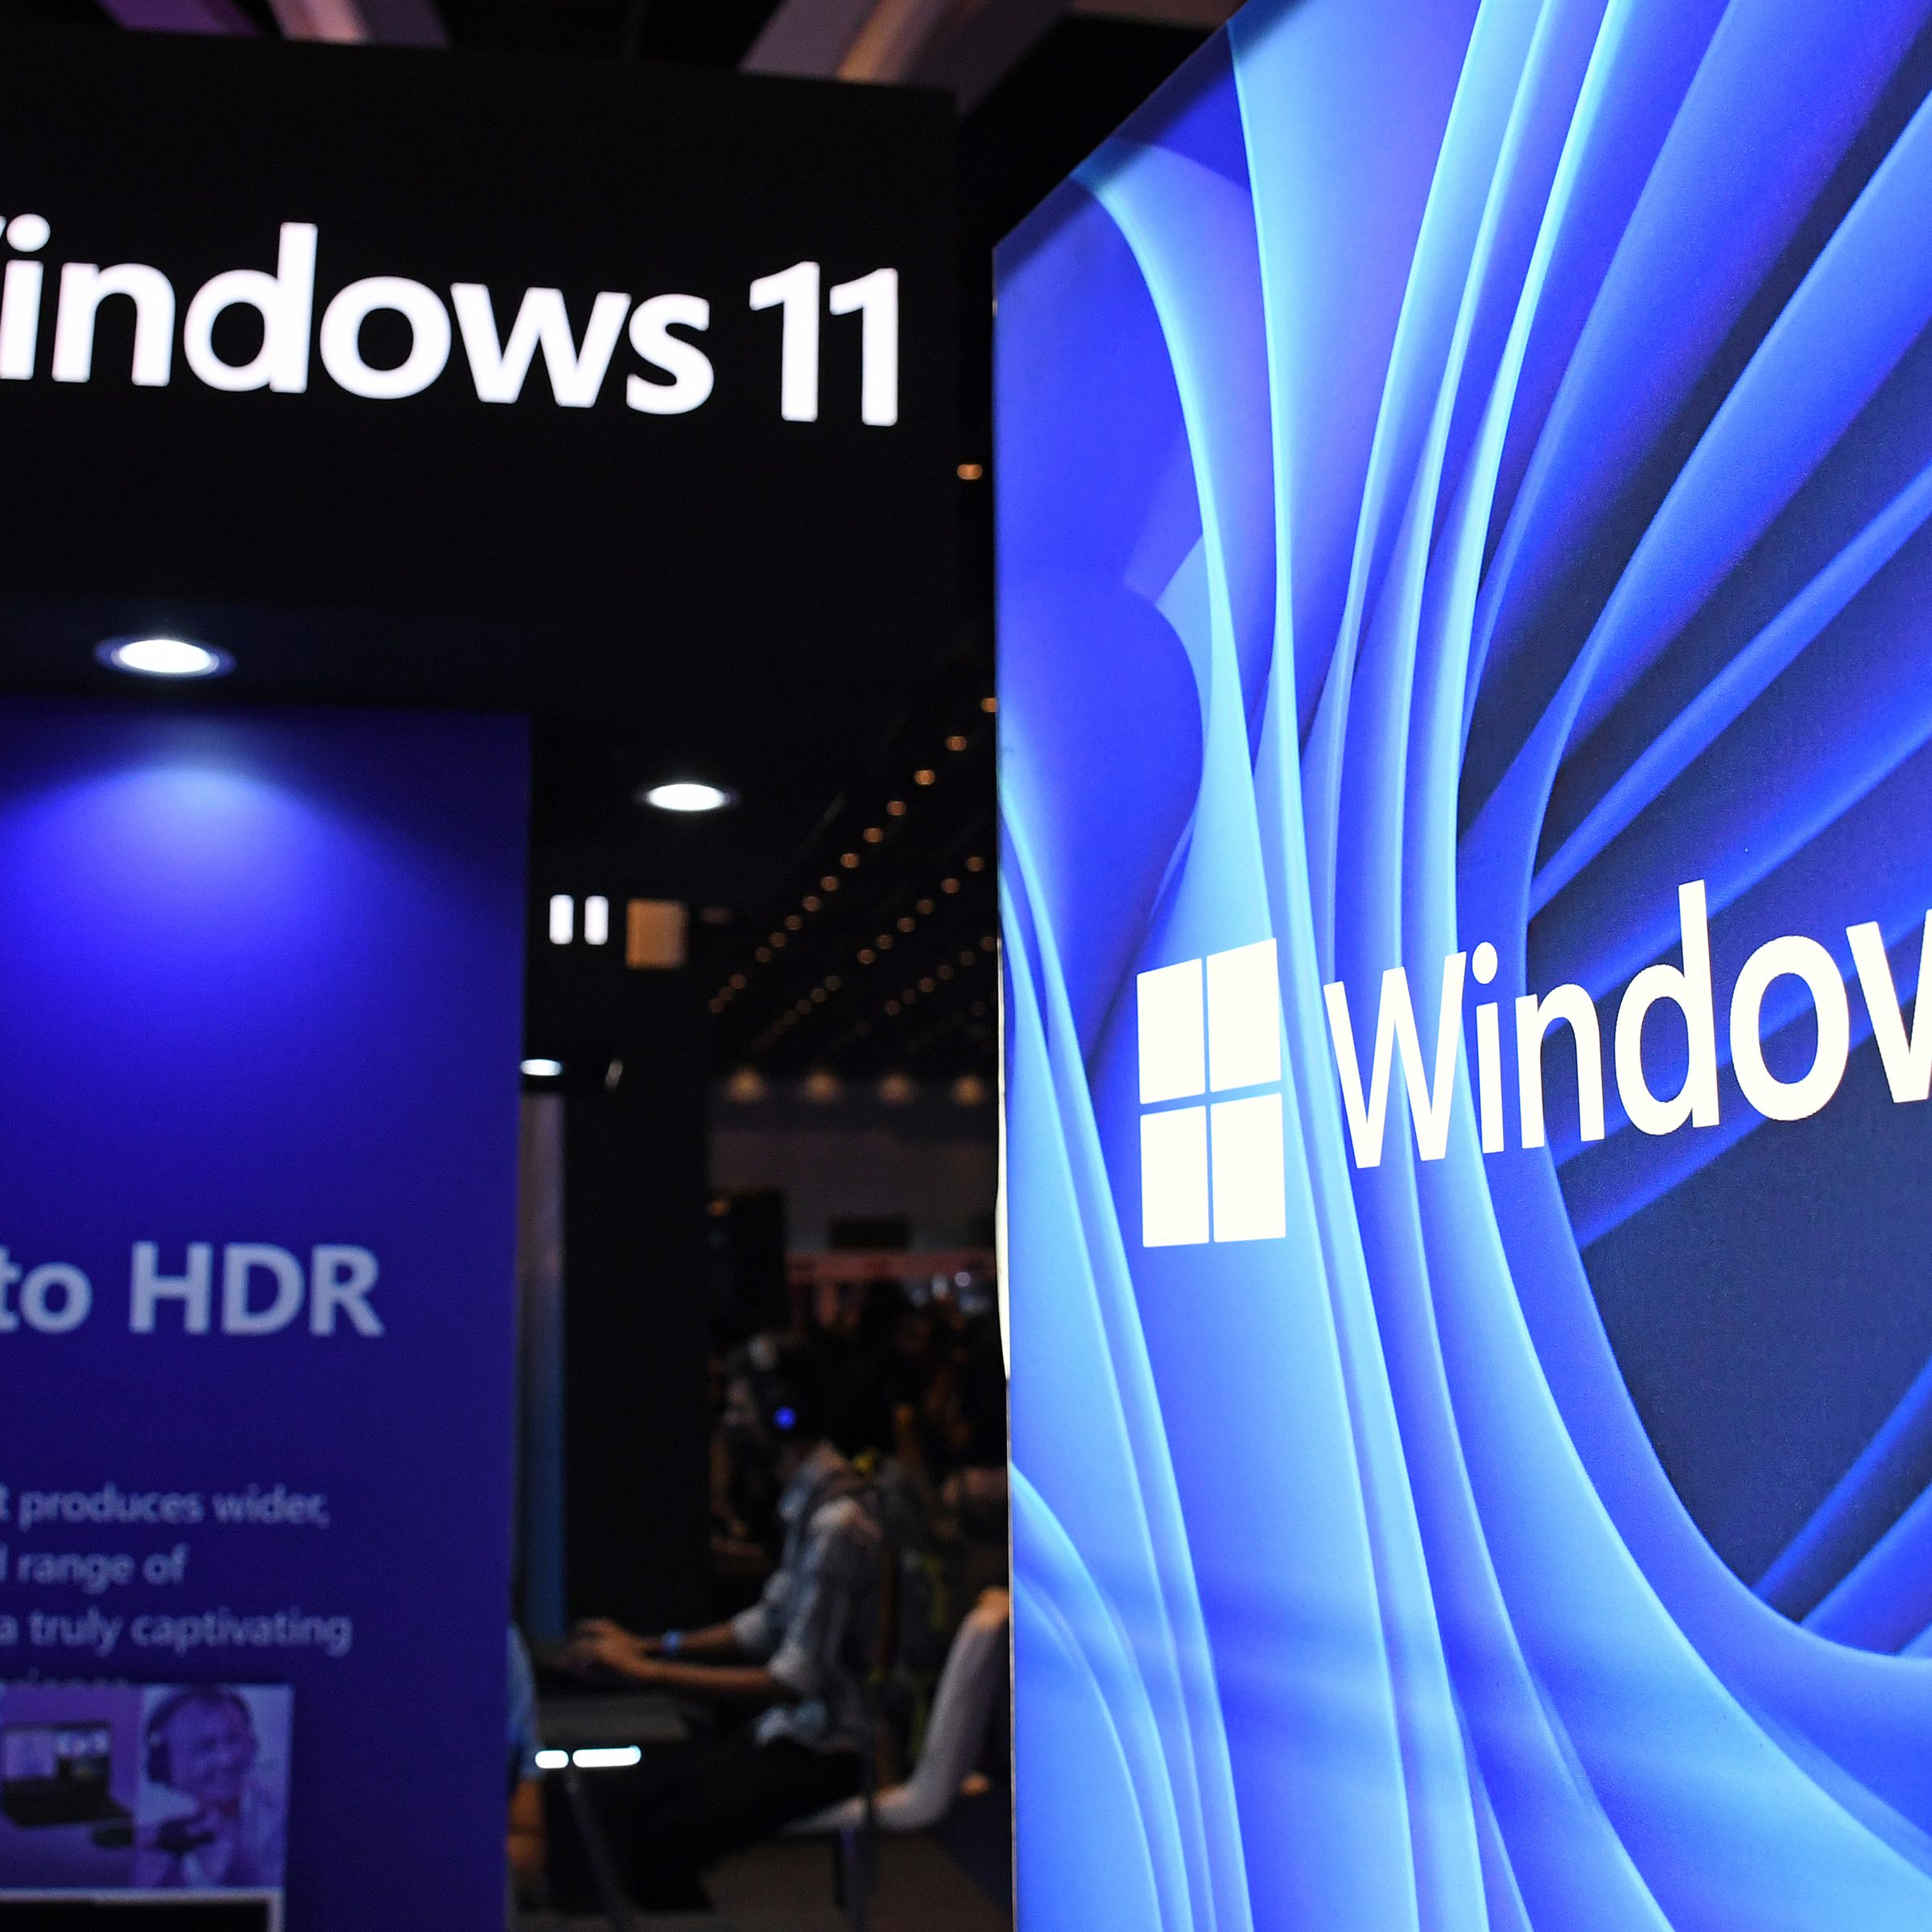 Windows 11 logo seen on a booth at Comic Con event...